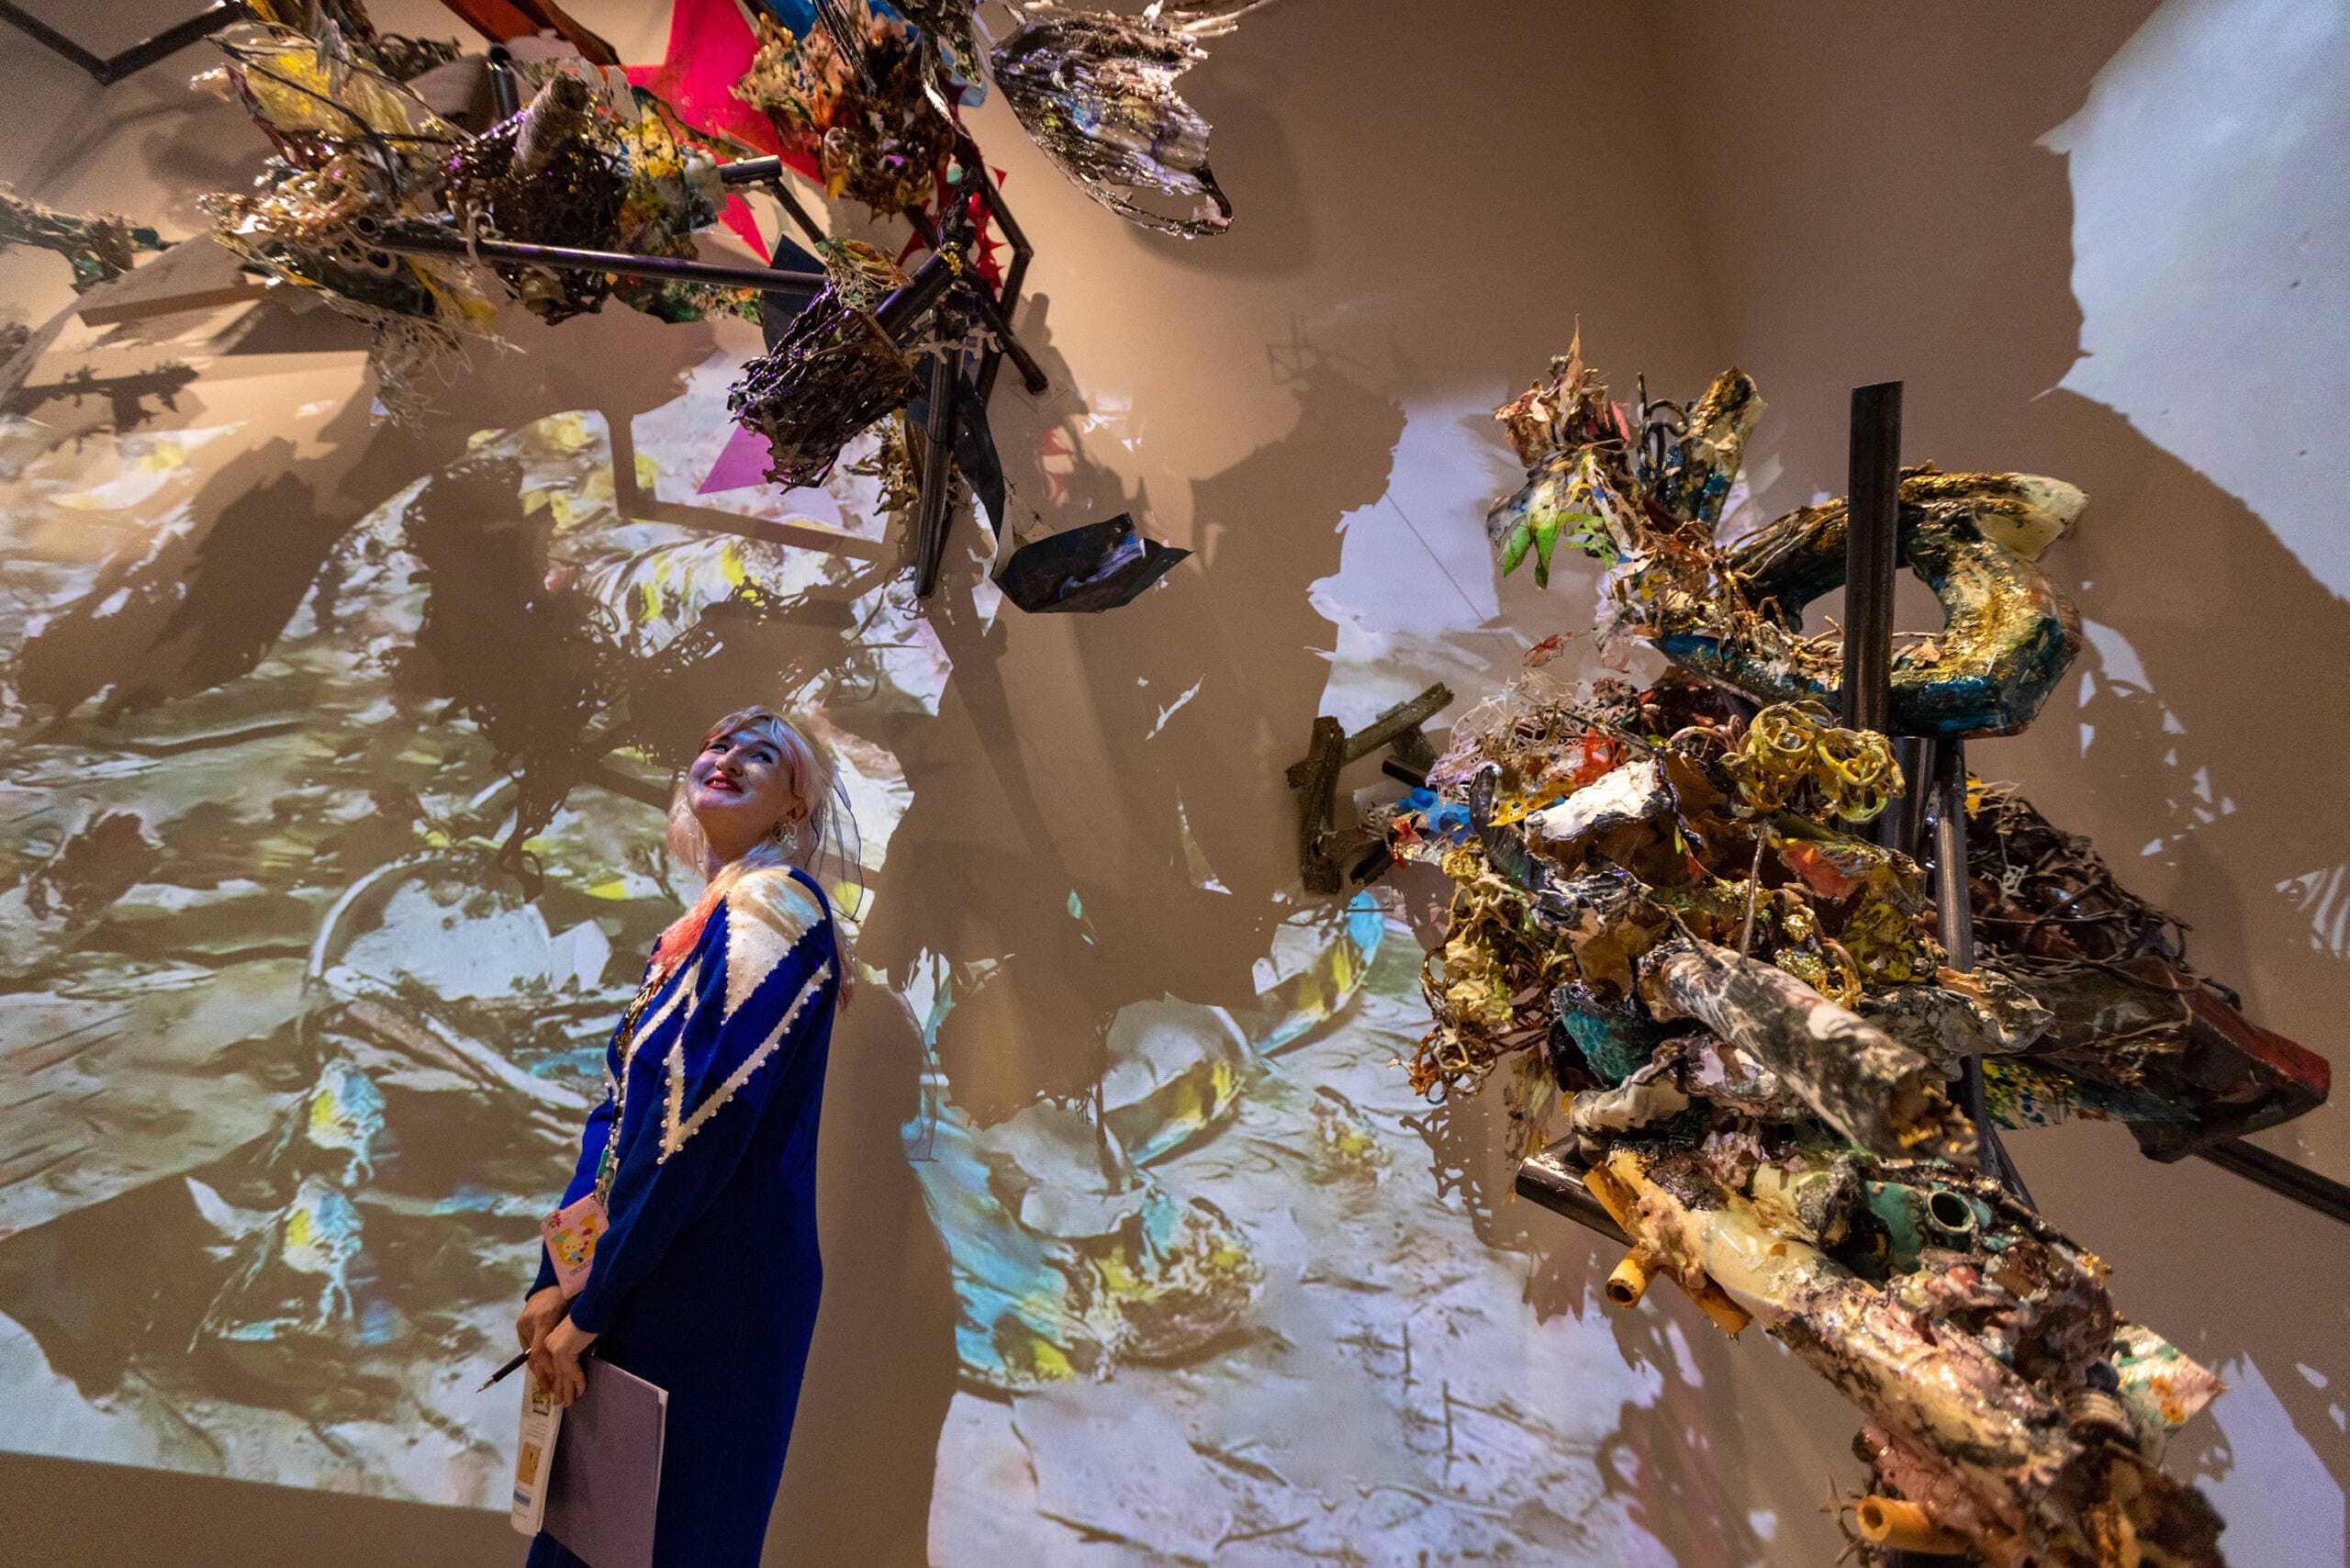 Kendall DeBoer, assistant curator of contemporary art at the MFA, walks through “Boru Sibaso Paet, on the foam of the primordial sea,” Linda Sormin’s interactive mixed-media installation at the &quot;Hokusai: Inspiration and Influence&quot; show. (Jesse Costa/WBUR)